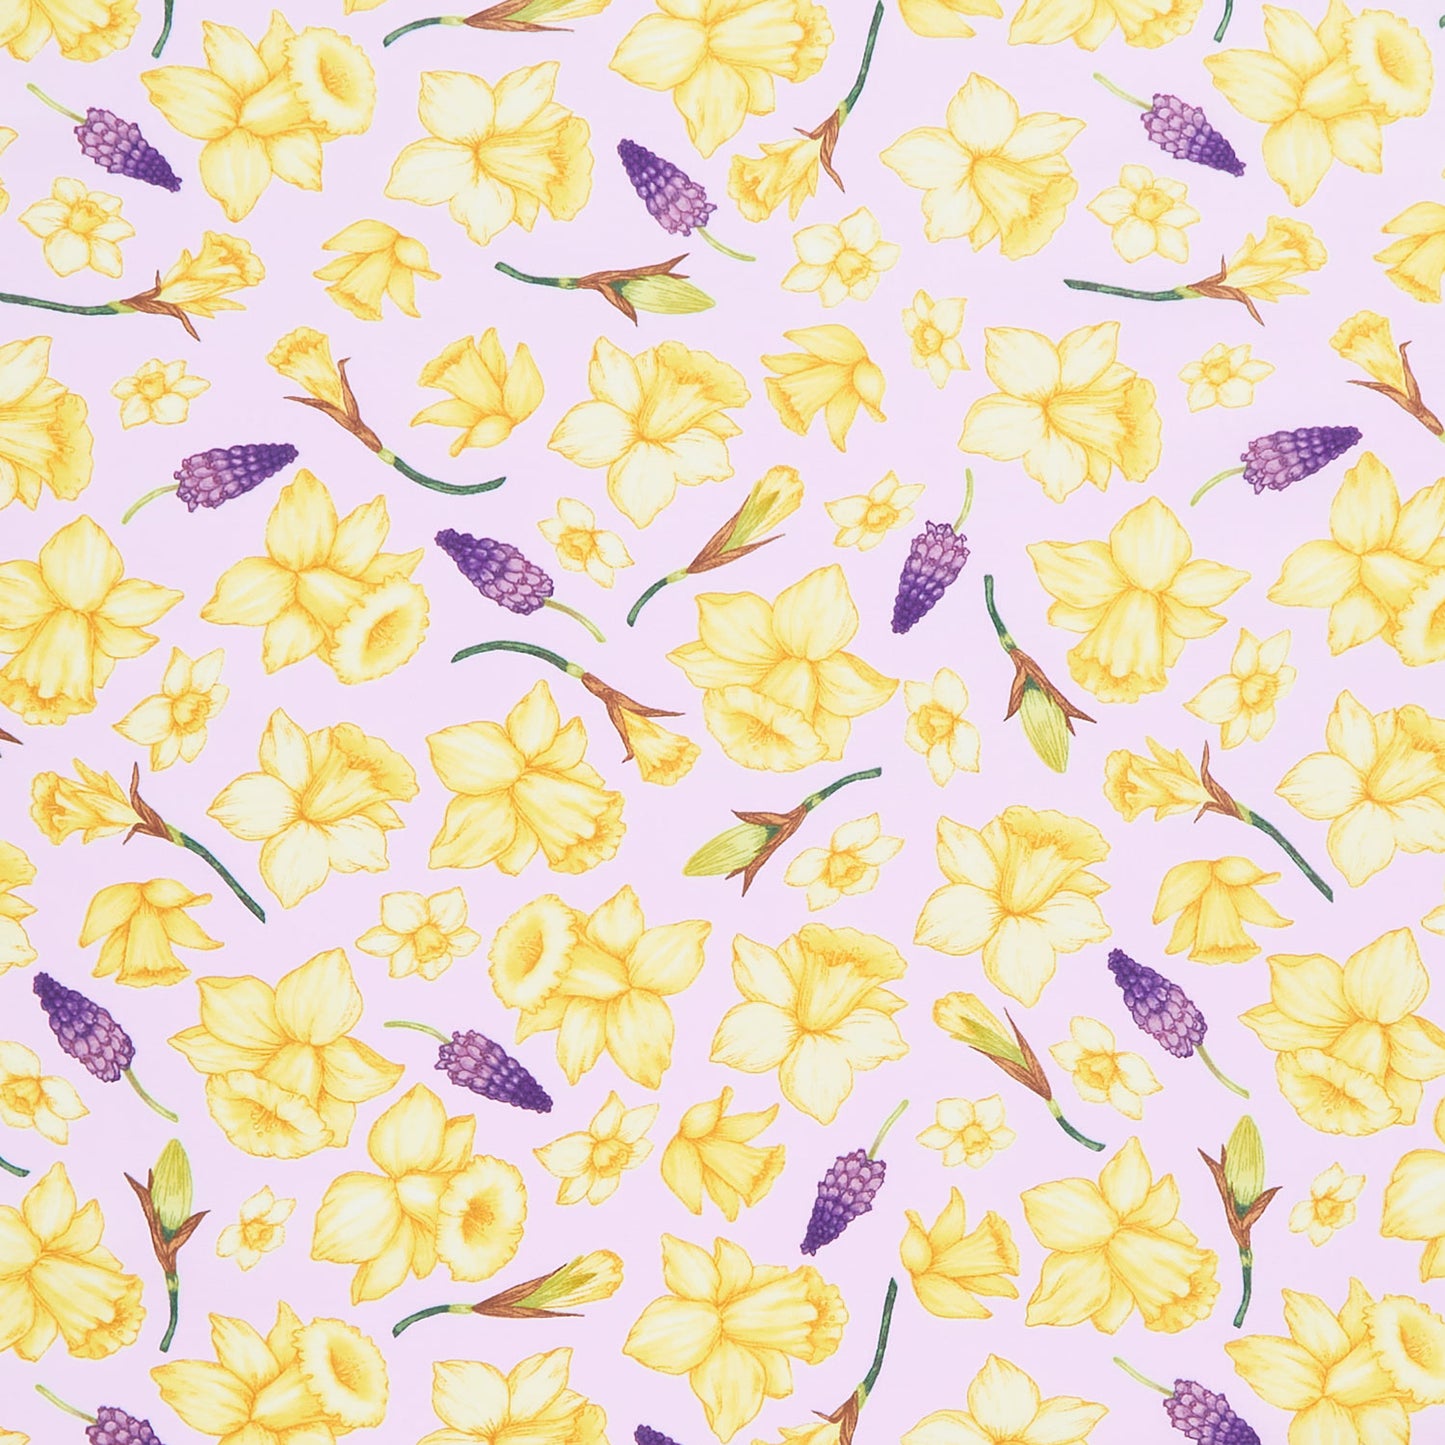 Monthly Placemat Coordinate - Daffodils Lavender Yardage Primary Image